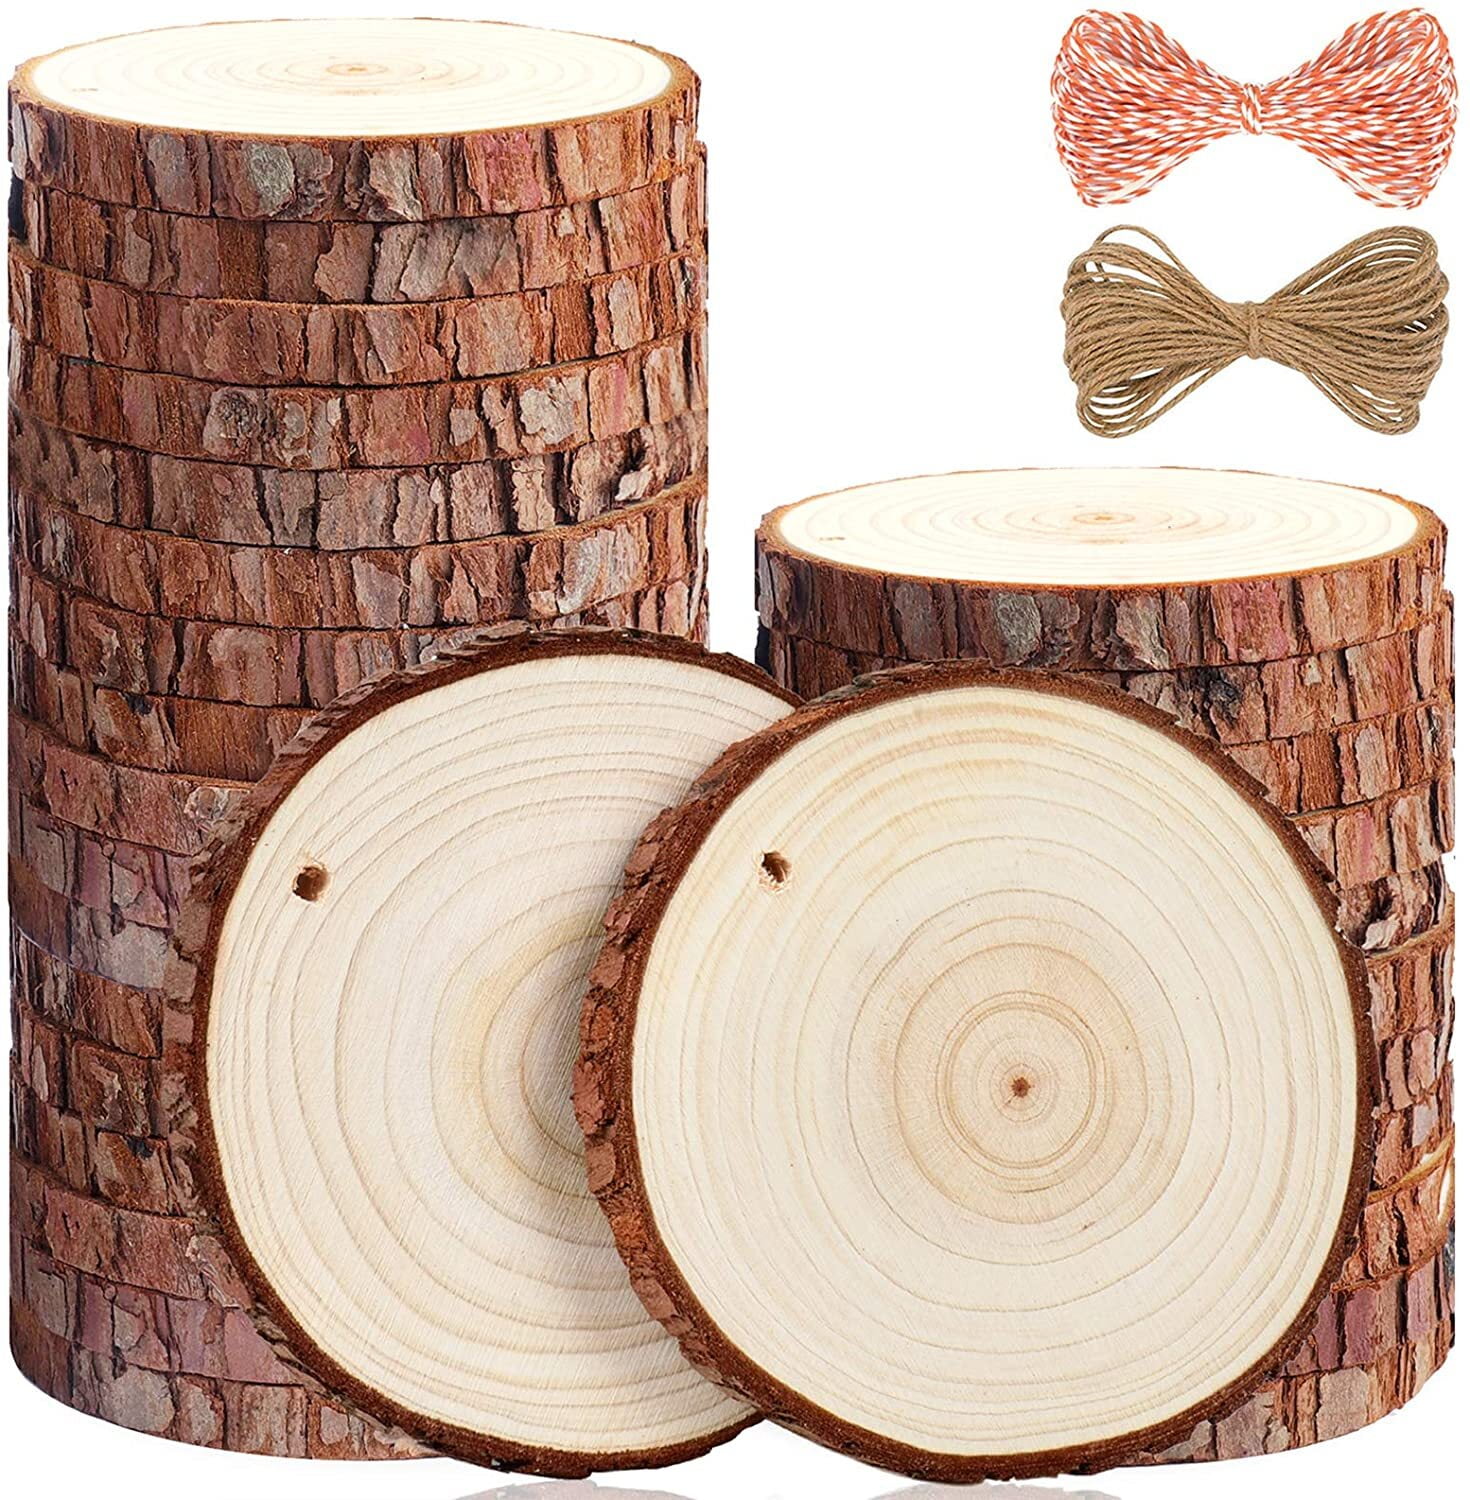 ilauke Wood Slices for Crafts 16Pcs 3.5''-4'' Unfinished Wood Rounds  Natural Thicken Wood Slab with Bark for Coasters Centerpieces Wedding  Rustic